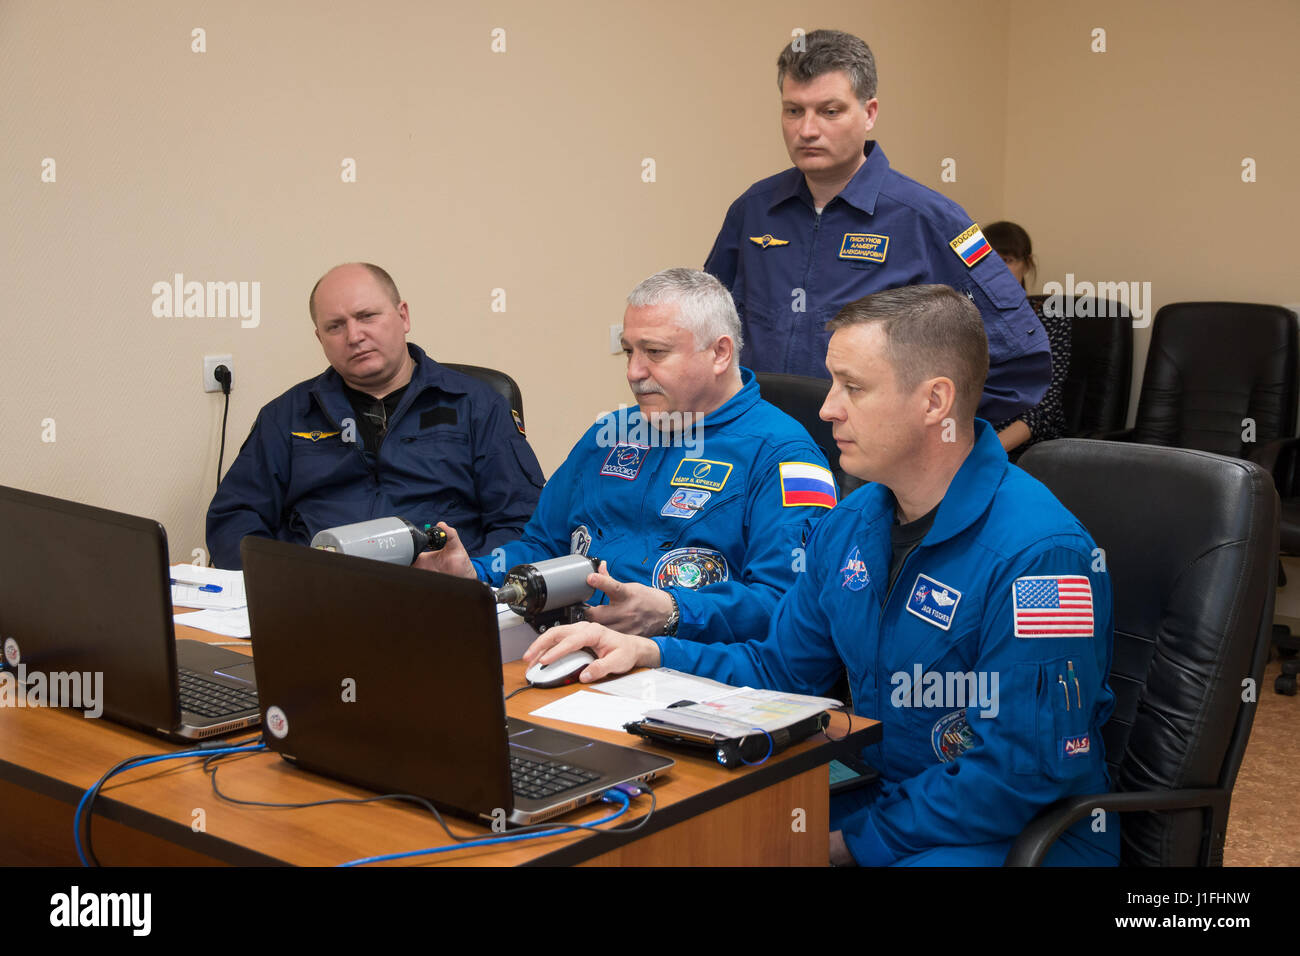 NASA International Space Station Expedition 51 Soyuz MS-04 mission prime crew members Russian cosmonaut Fyodor Yurchikhin of Roscosmos (center) and American astronaut Jack Fischer (right) practice on a laptop simulator during pre-launch training at the Cosmonaut Hotel April 13, 2017 in Baikonur, Kazakhstan.       (photo by Victor Zelentsov /NASA   via Planetpix) Stock Photo